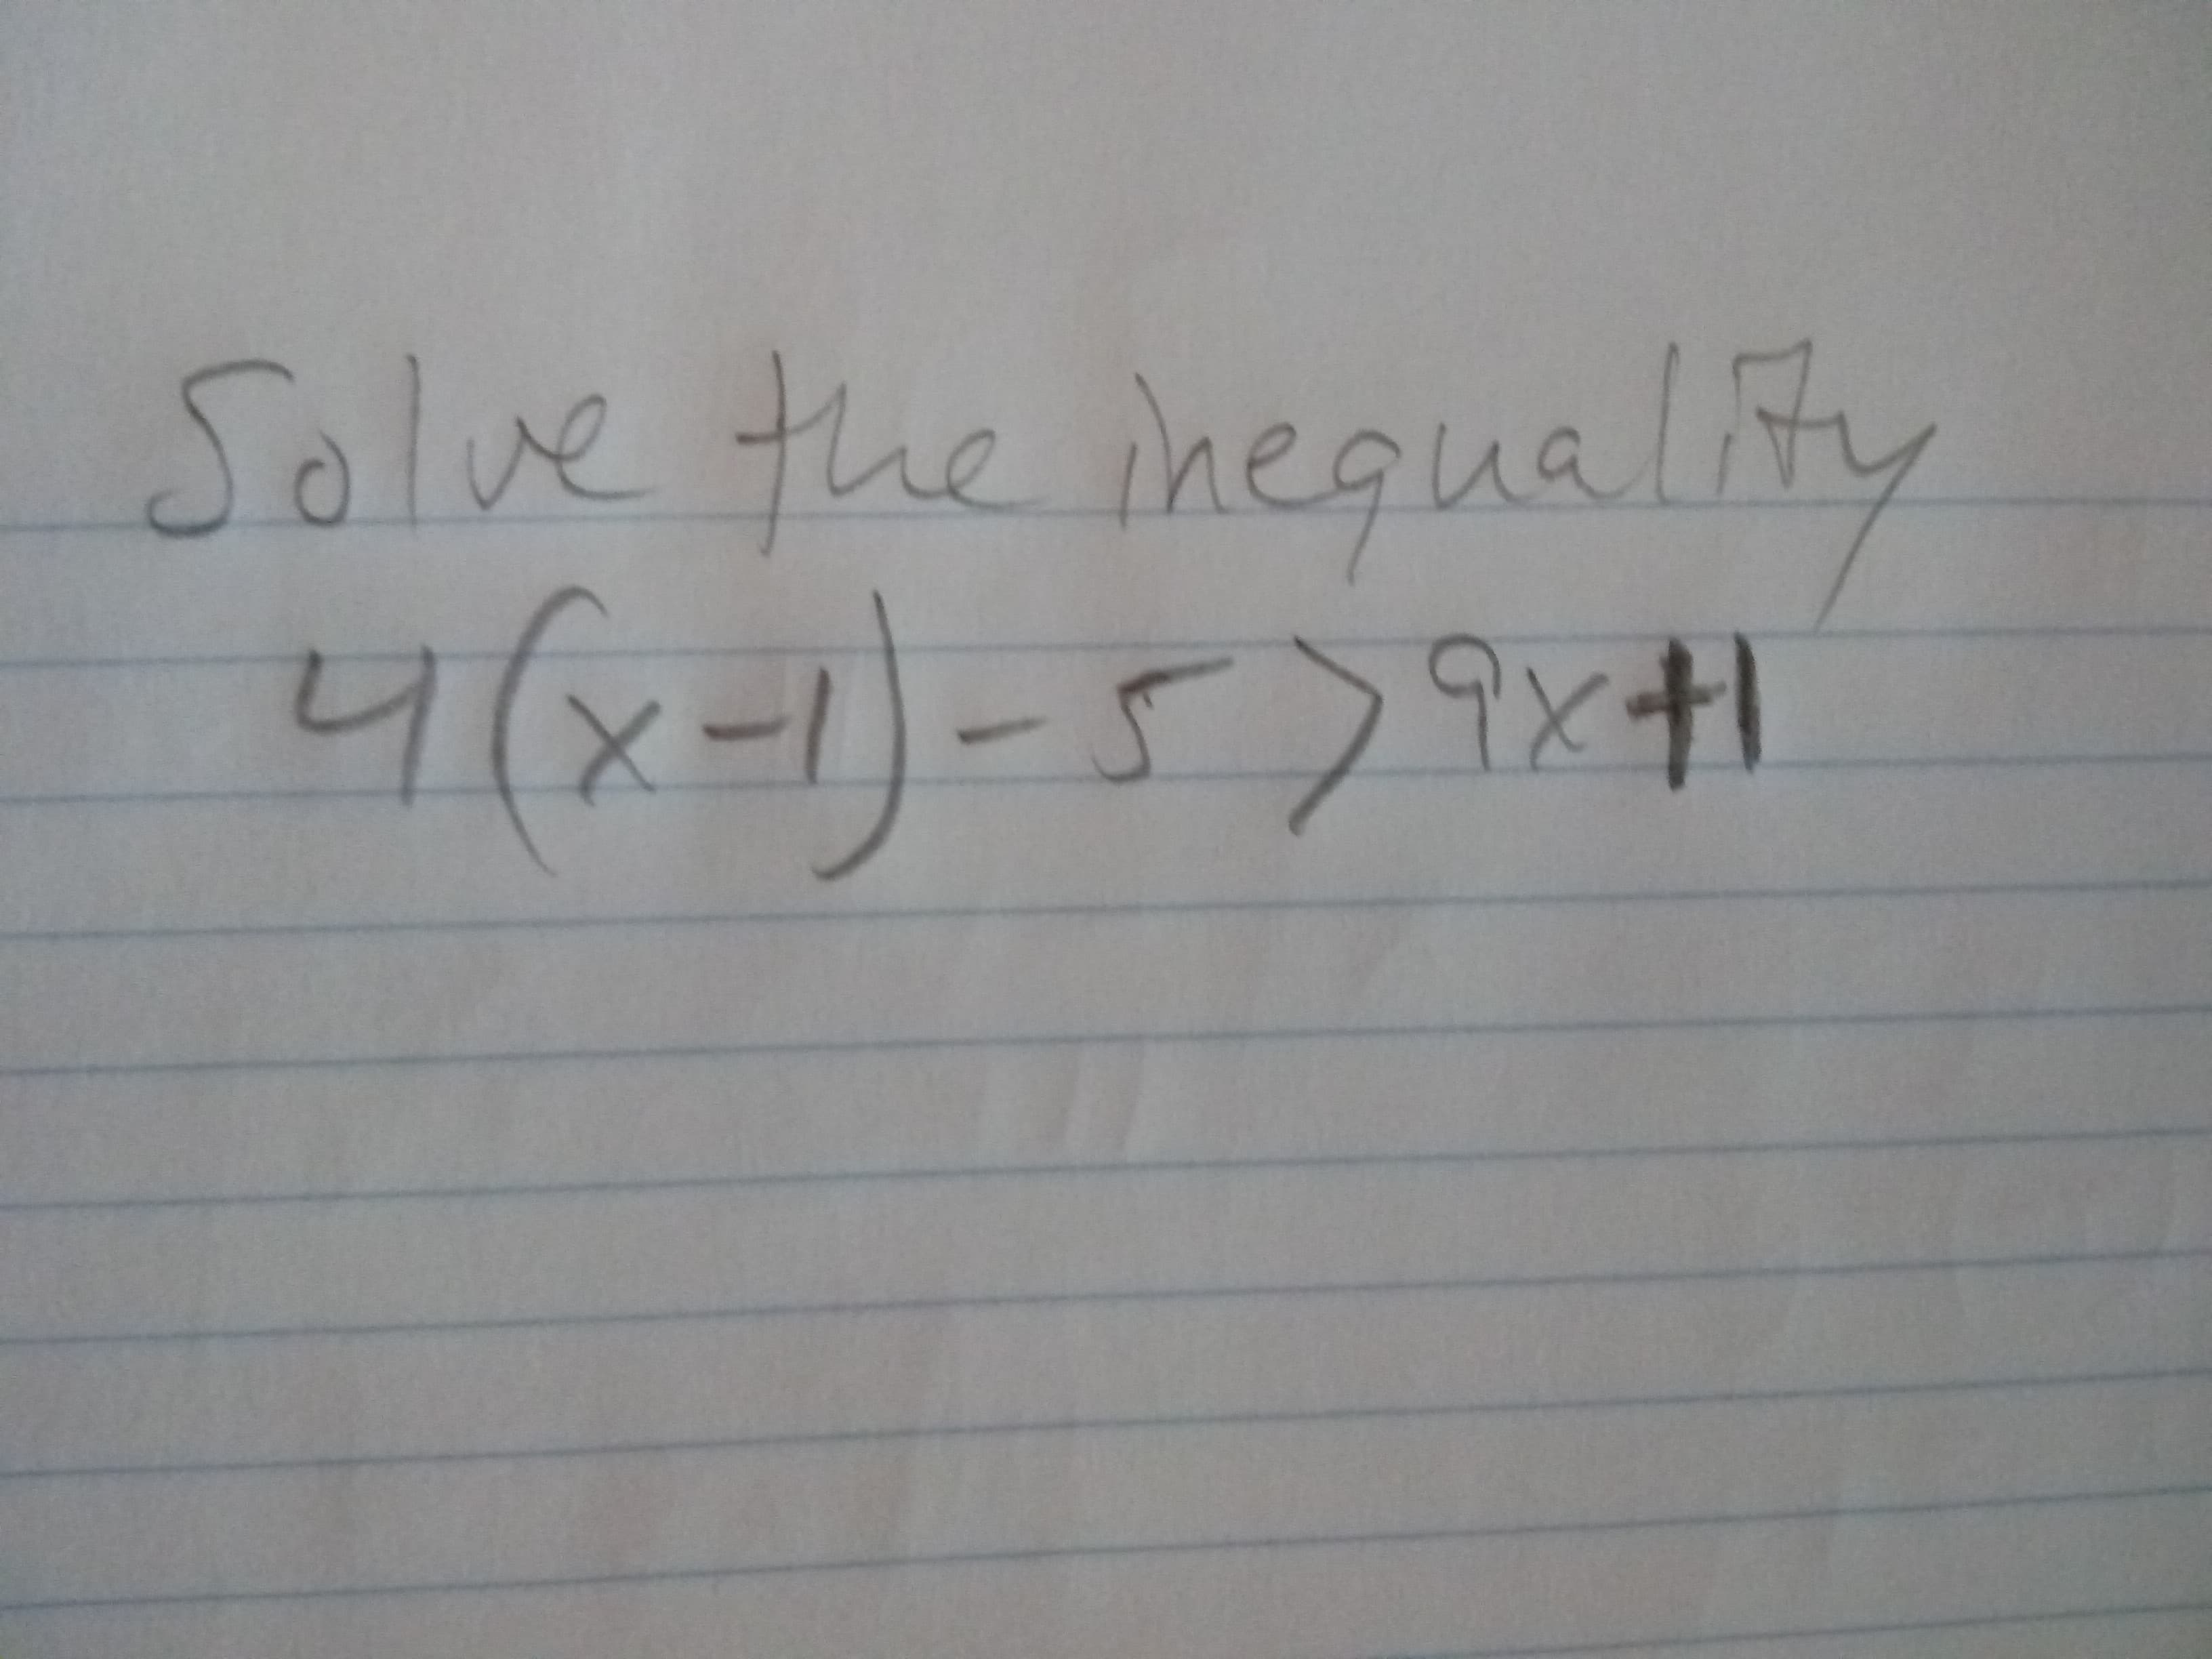 Solve the iheguality
(x-リ-r>x
